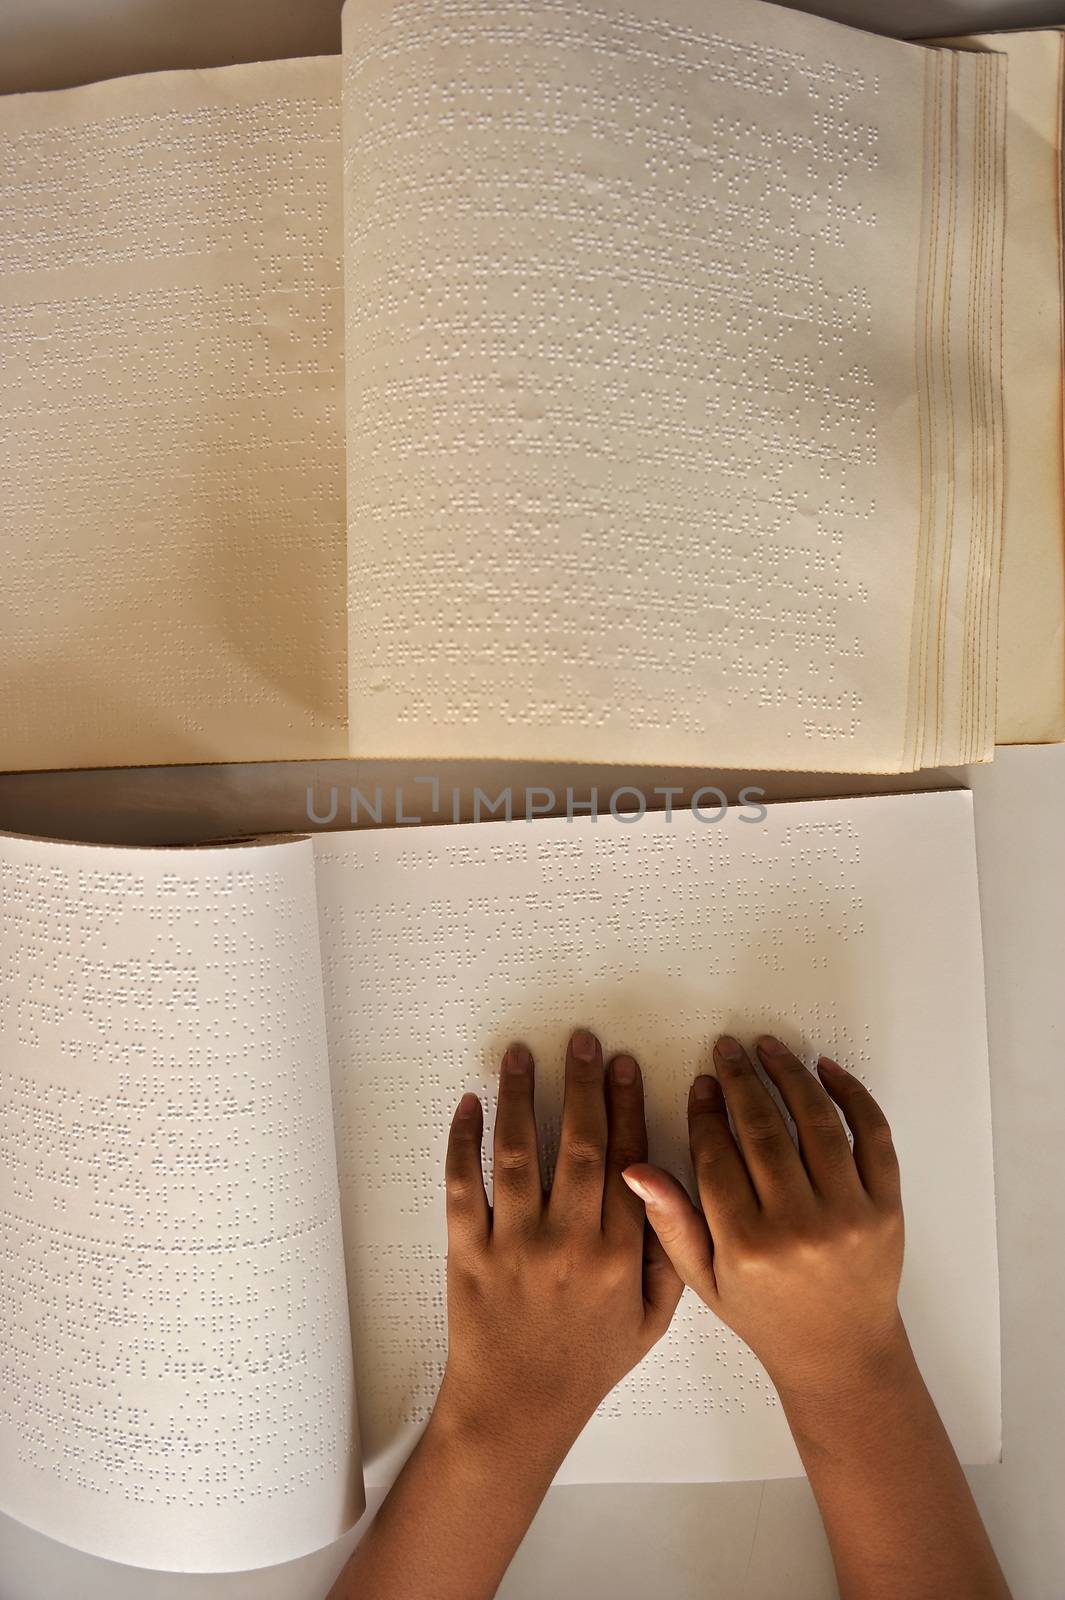 Blind reading text in braille language by think4photop